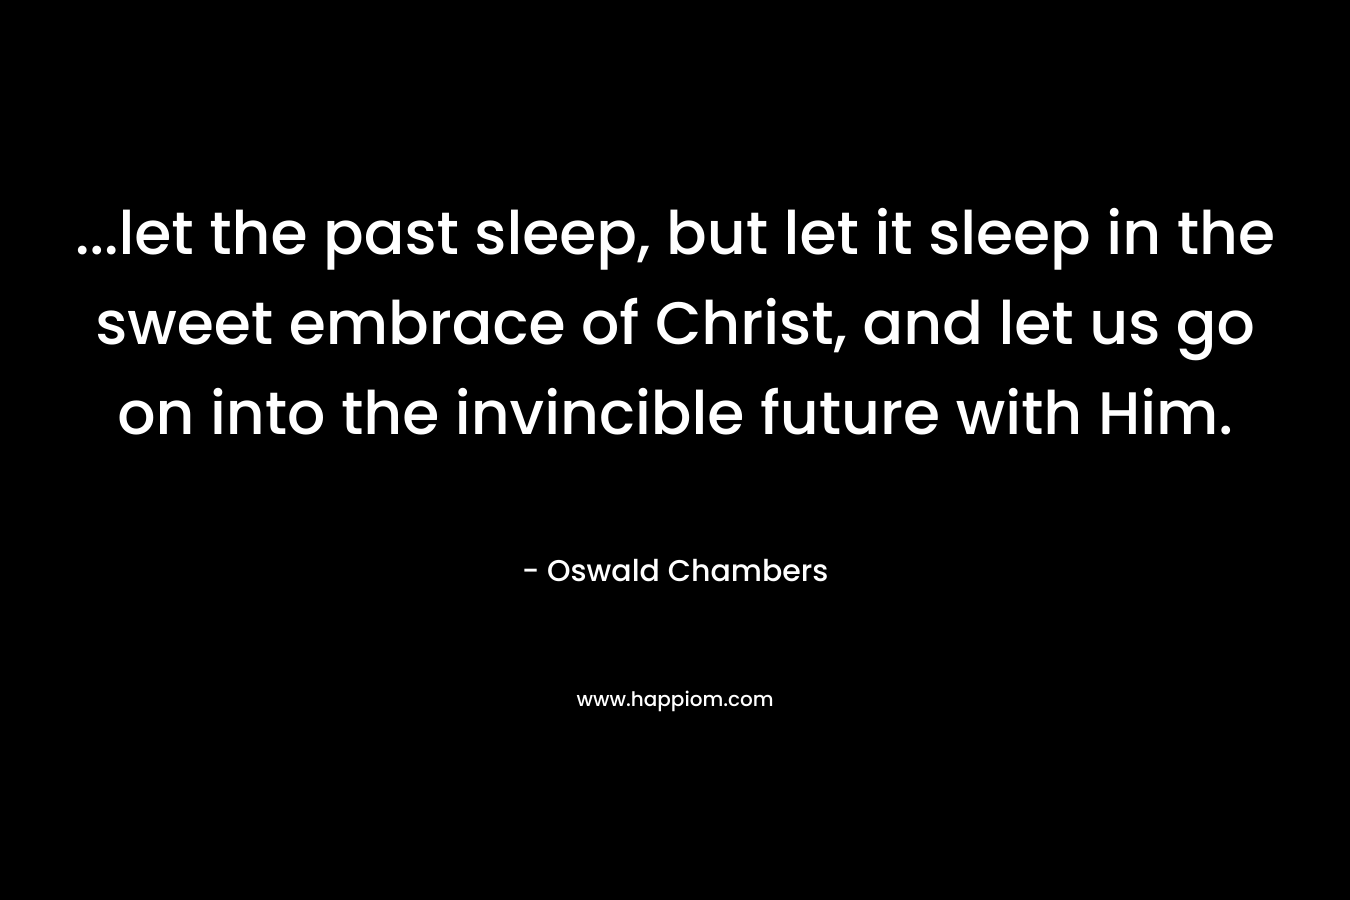 ...let the past sleep, but let it sleep in the sweet embrace of Christ, and let us go on into the invincible future with Him.